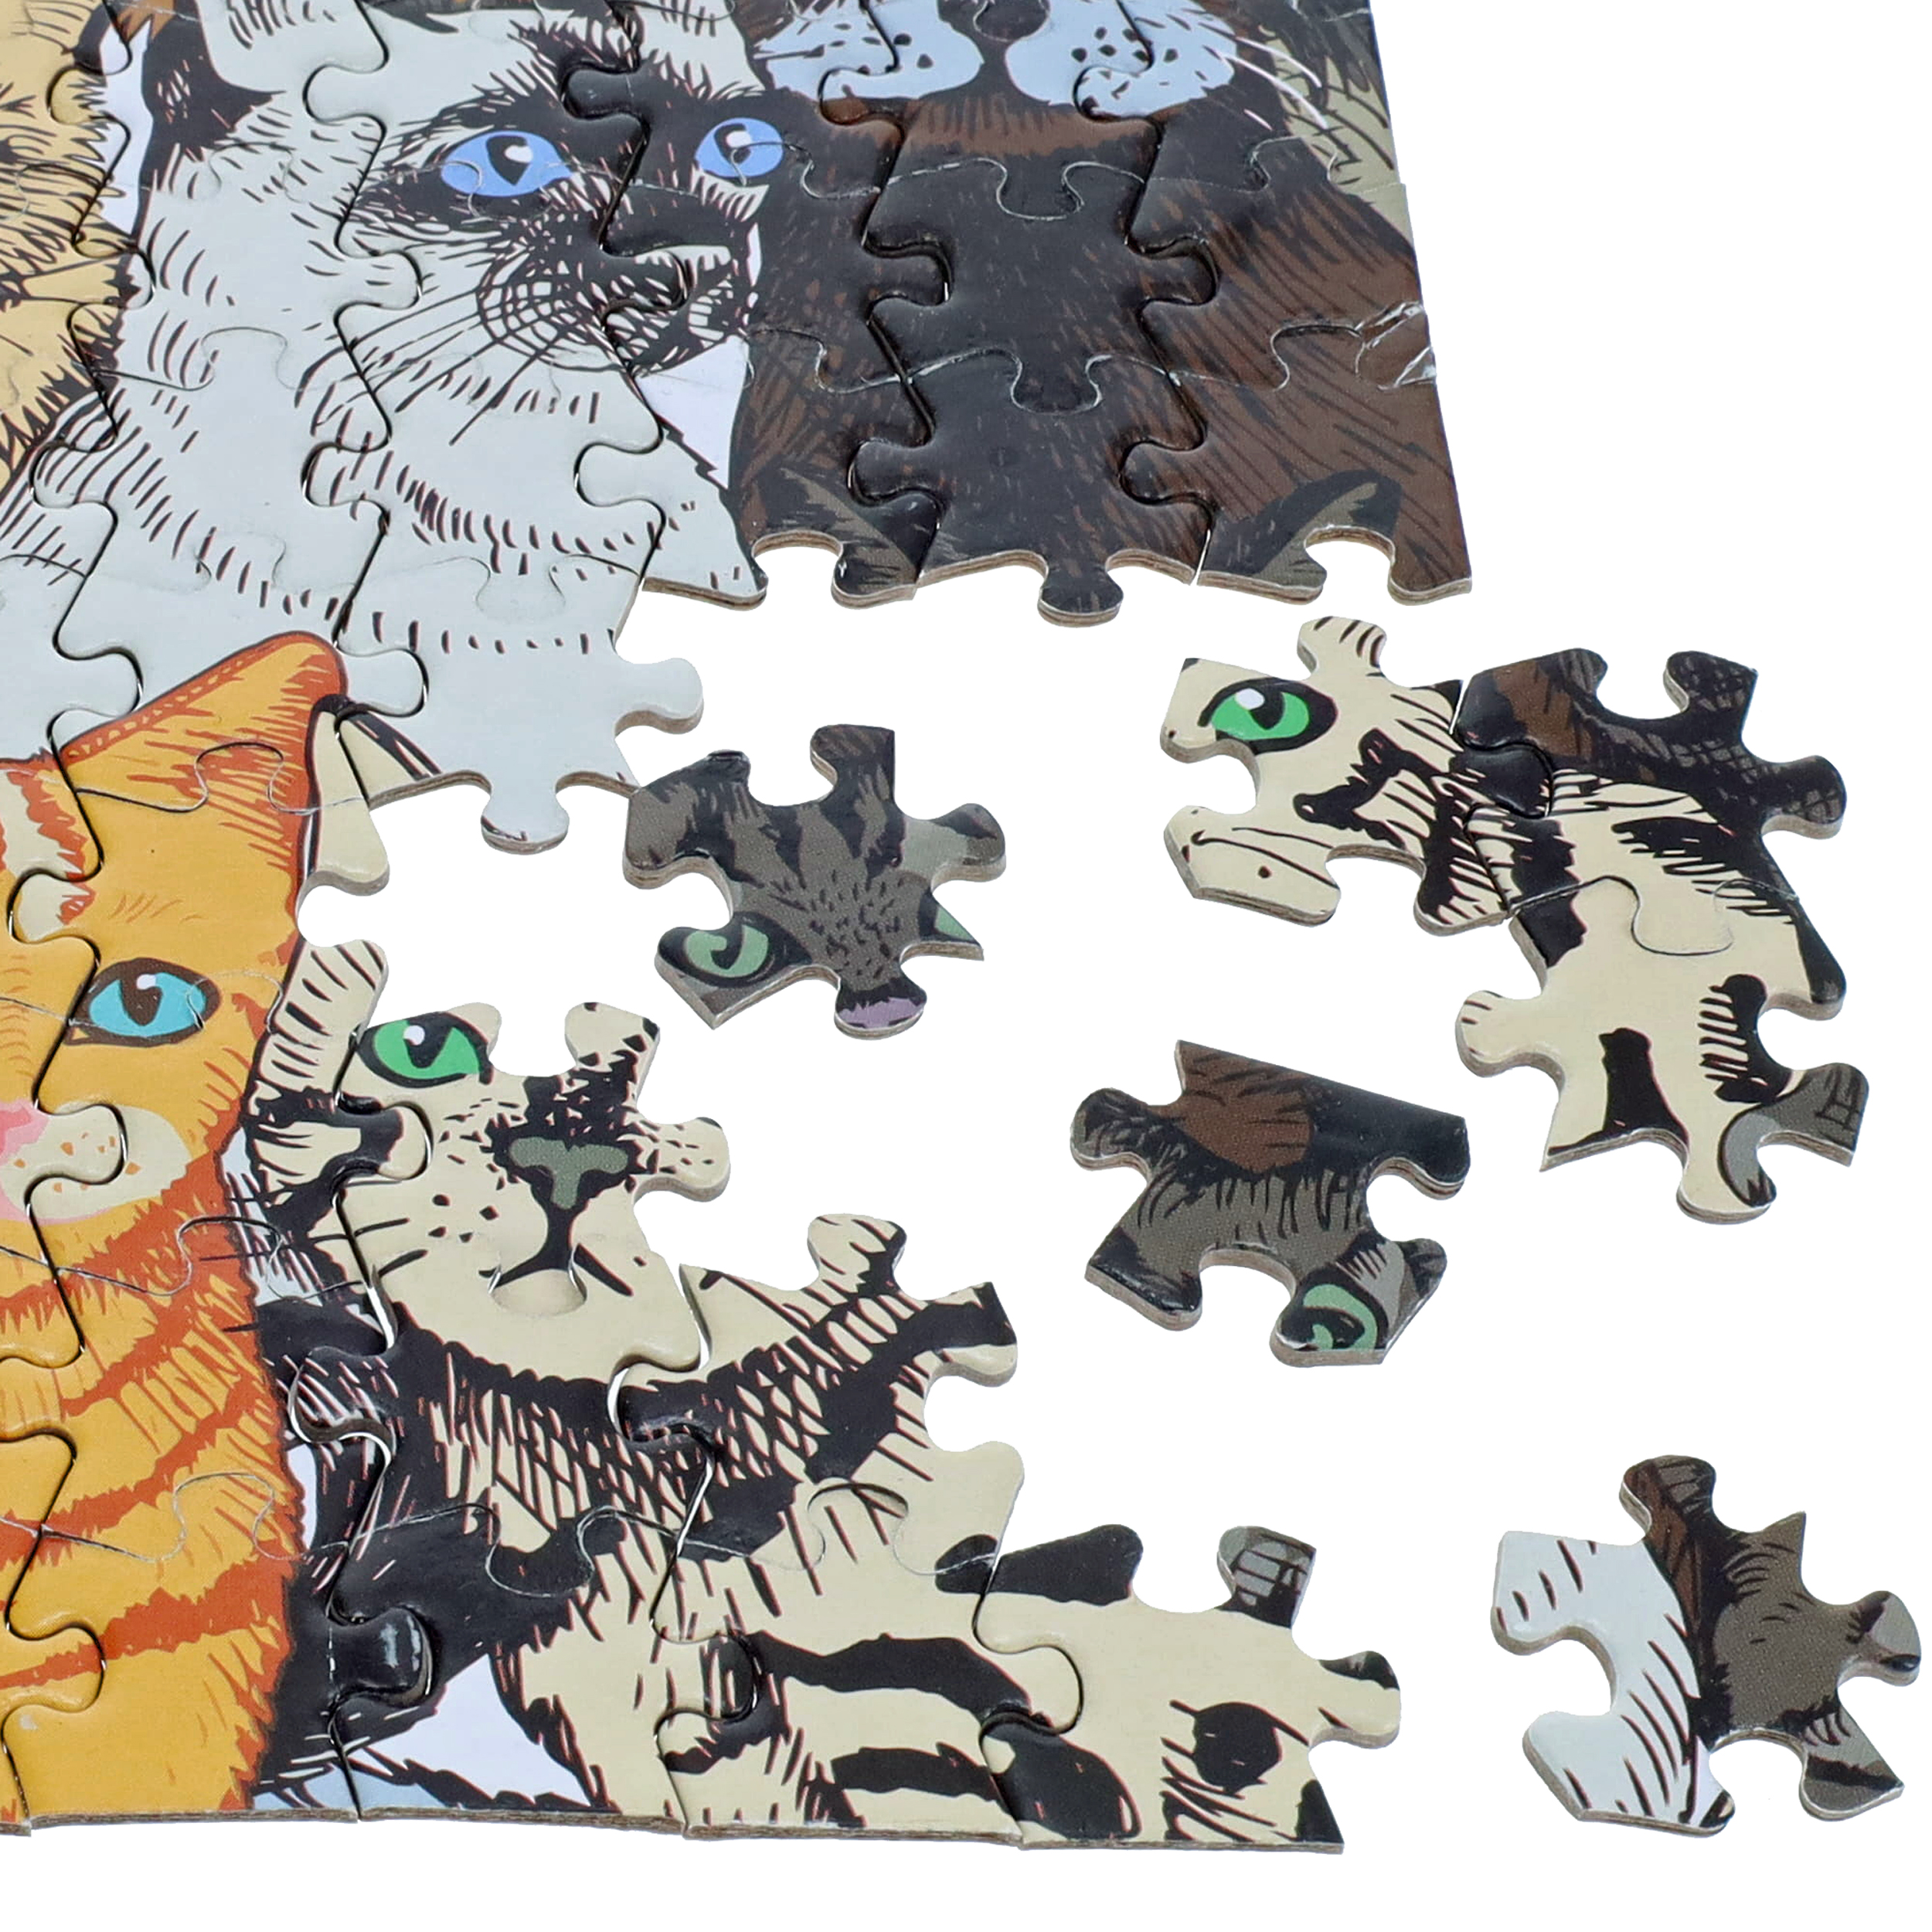 30 Photos That Show The Reality Of Trying To Finish A Puzzle With Your Cat